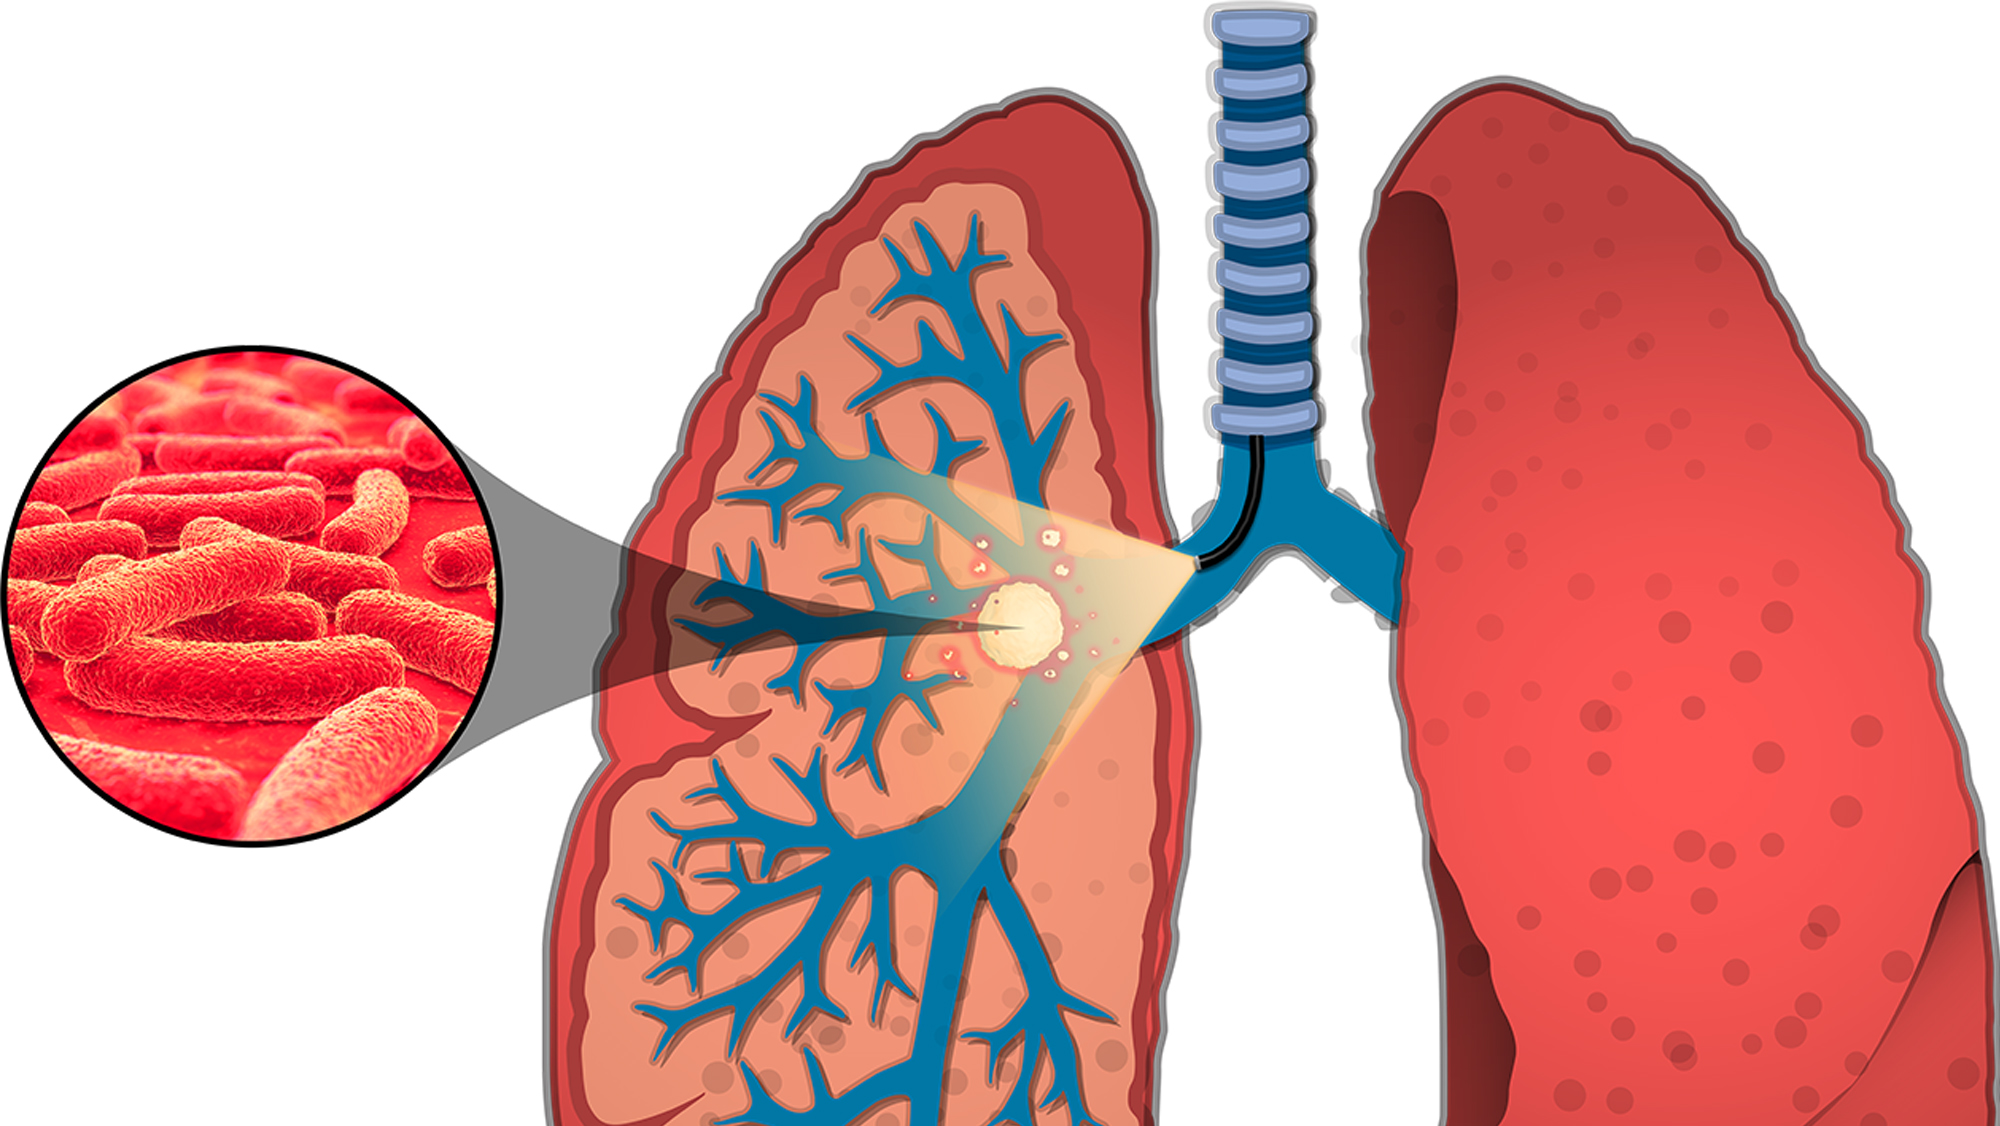 Graphic of tuberculosis imaging in a lung